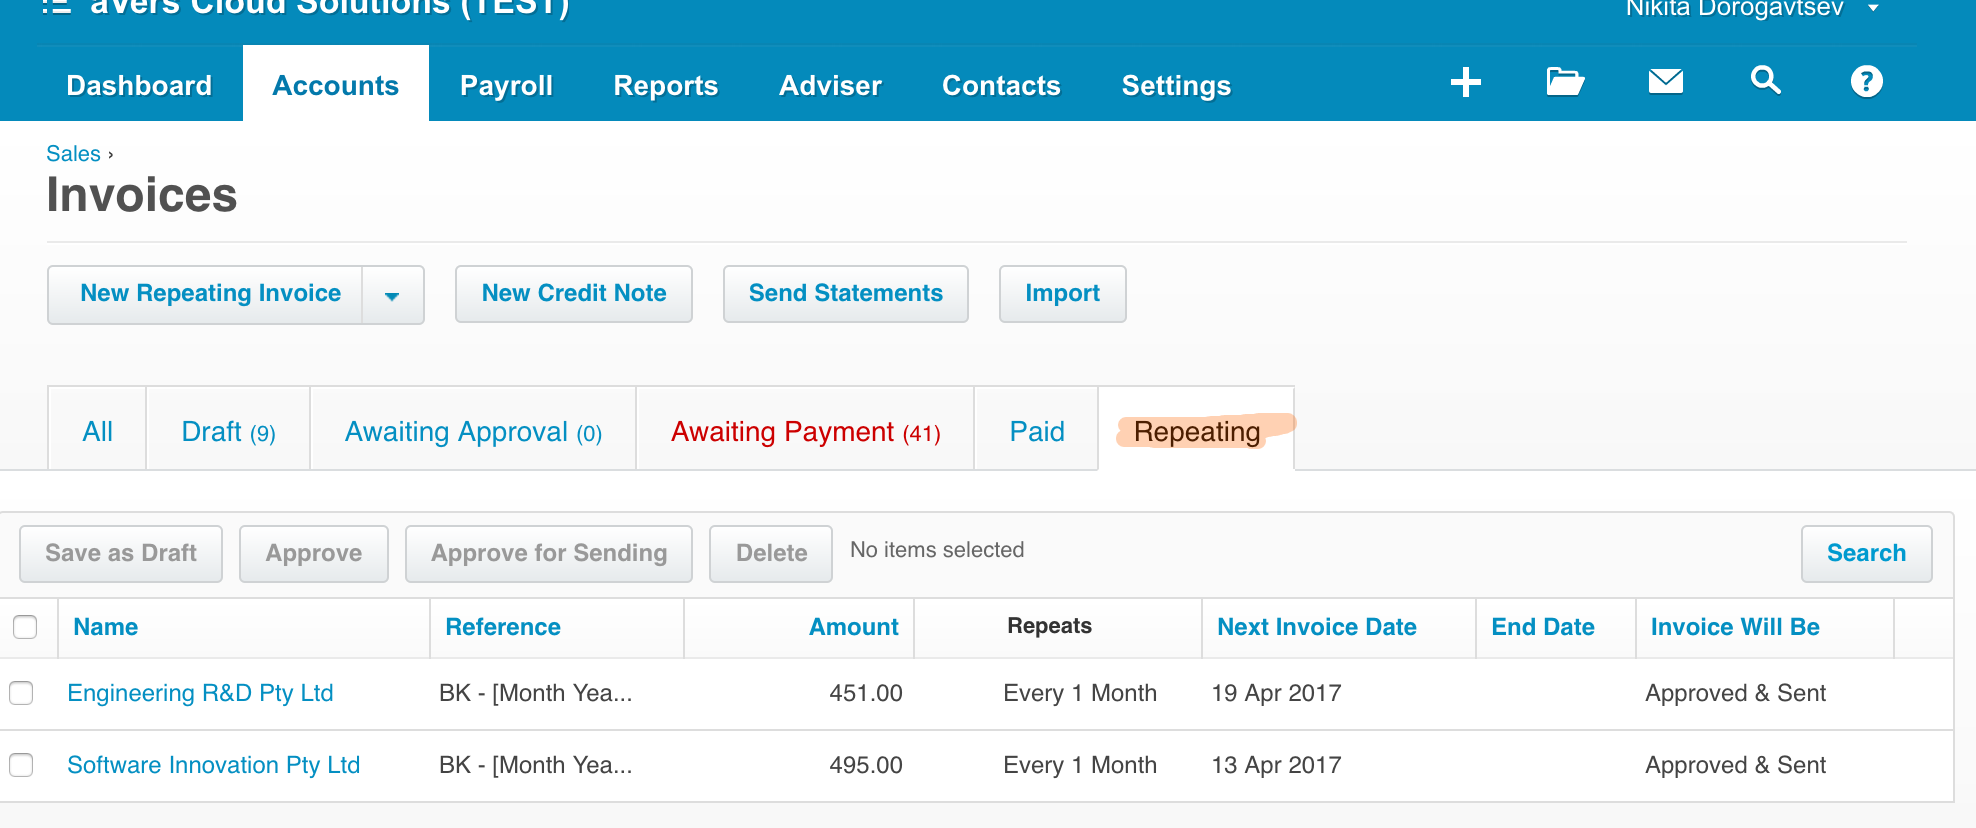 Sales Invoices Repeating Recurring